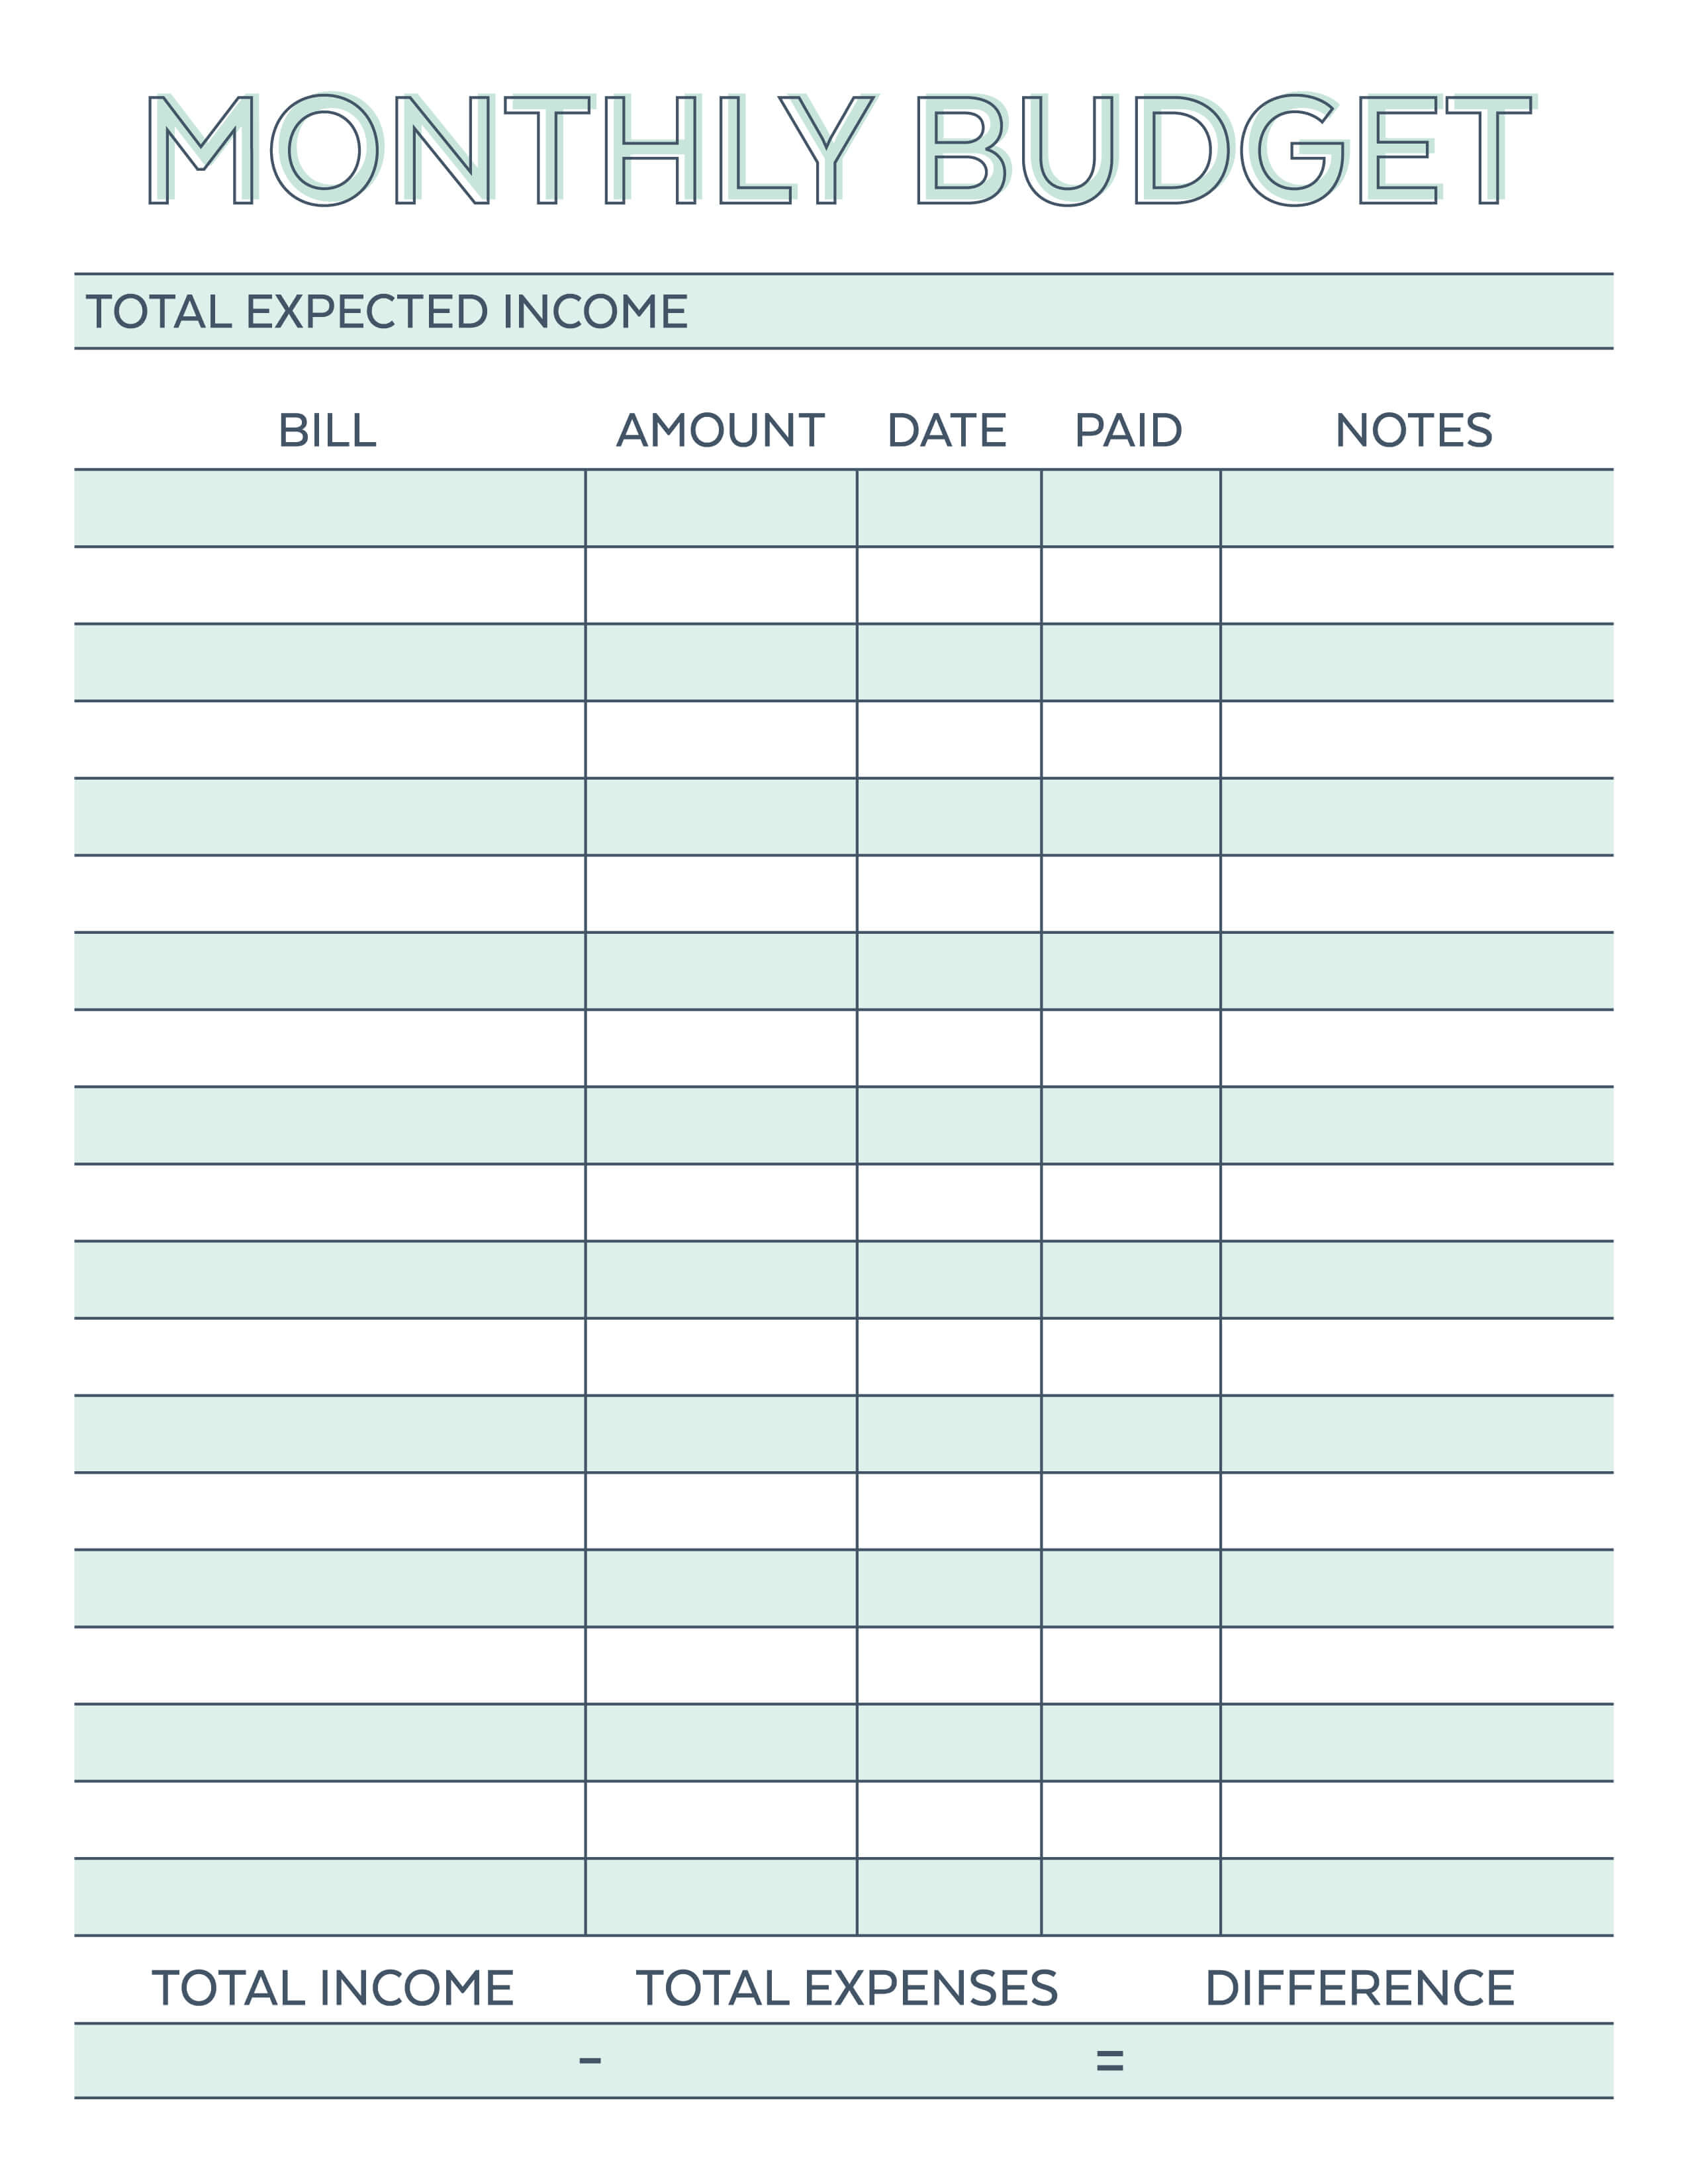 Monthly Budget Planner - Free Printable Budget Worksheet - Free Printable Home Budget Planner